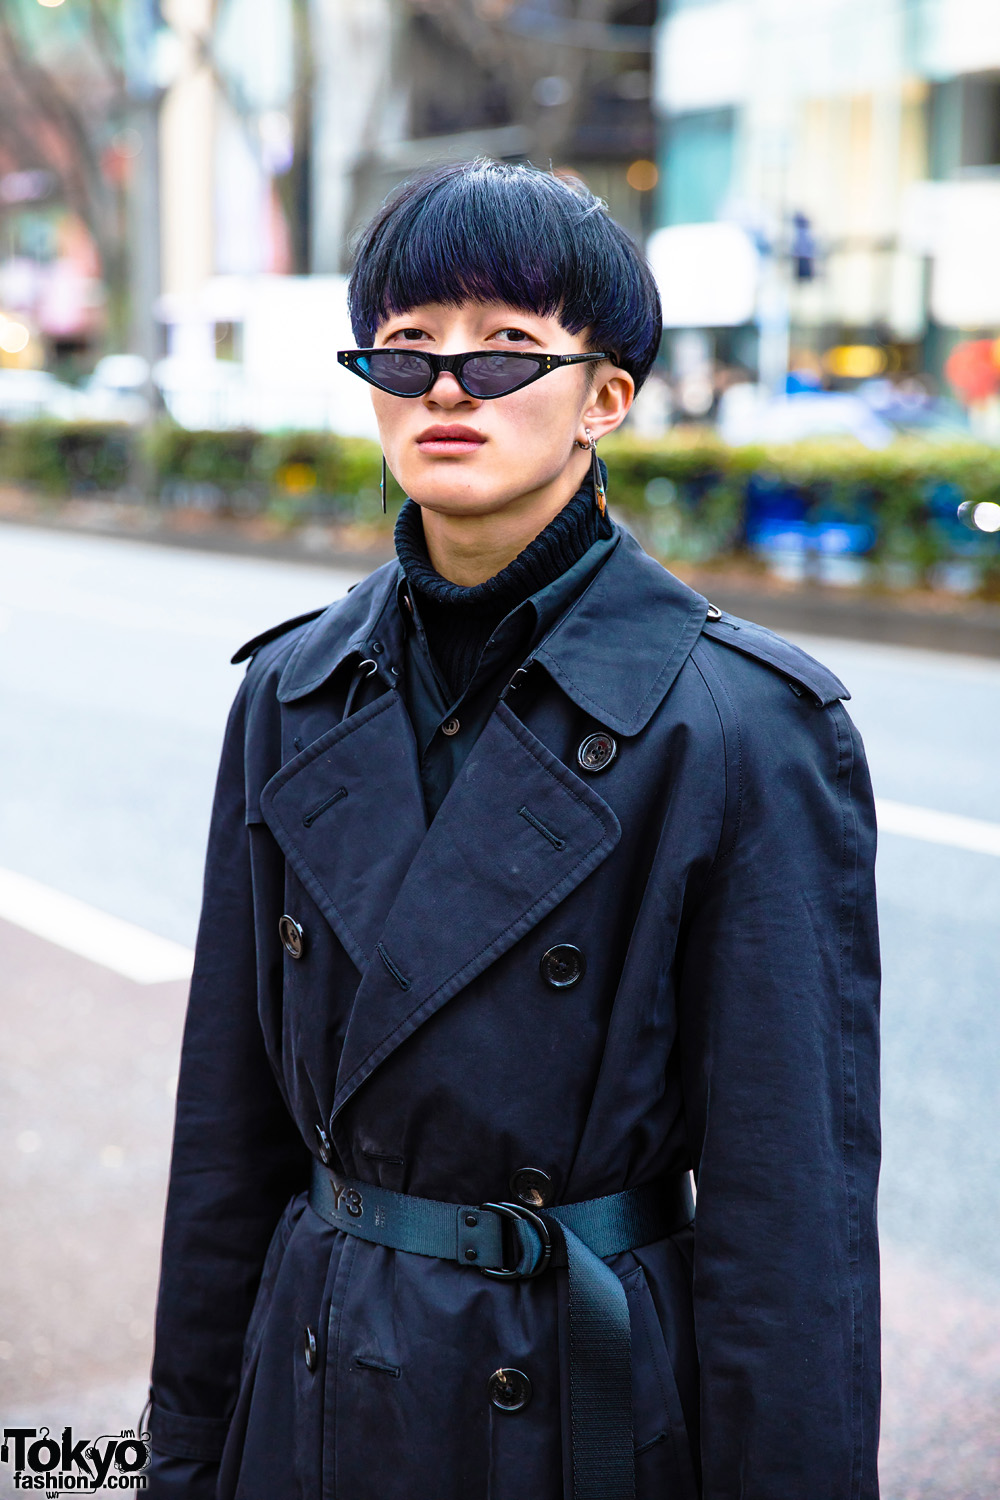 TVstation bestikke Konkurrence All Black Men's Winter Street Style w/ Burberry Trench Coat, Y-3, Notch  Wide Pants, Whoop-De-Doo Shoes & SAAD Pointy Glasses – Tokyo Fashion